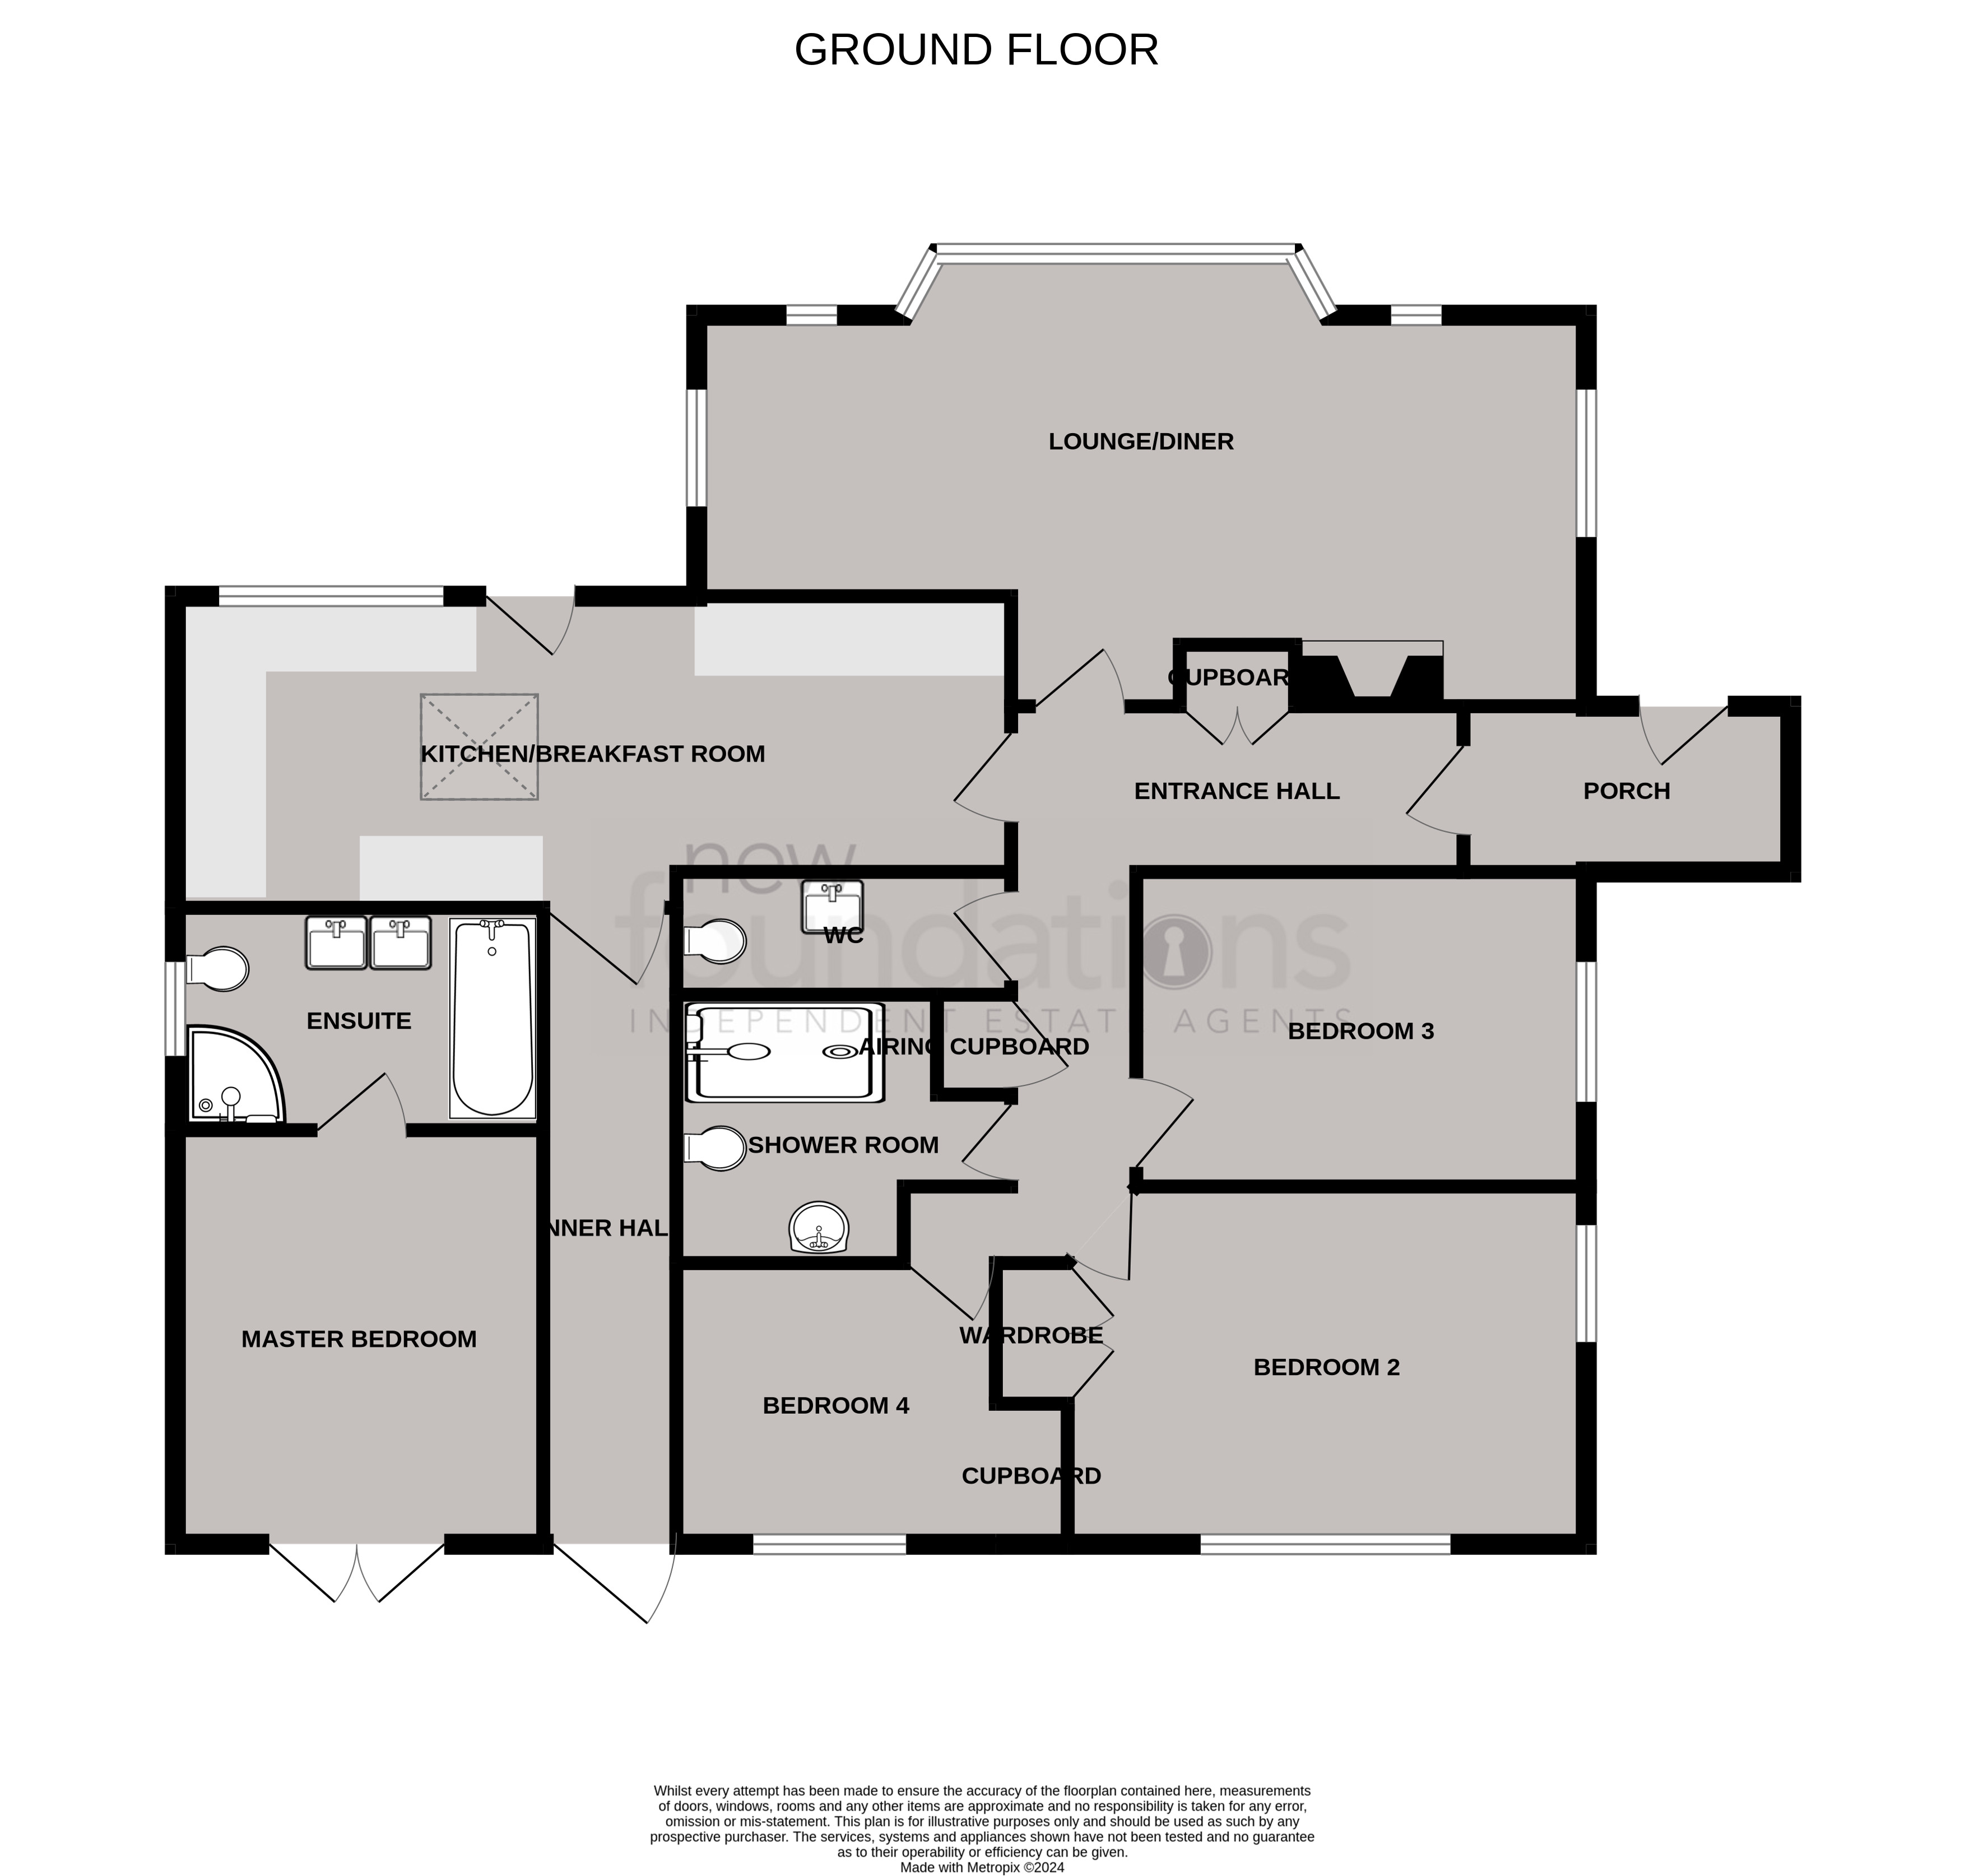 Floorplans For Uplands Close, Bexhill-on-Sea, East Sussex